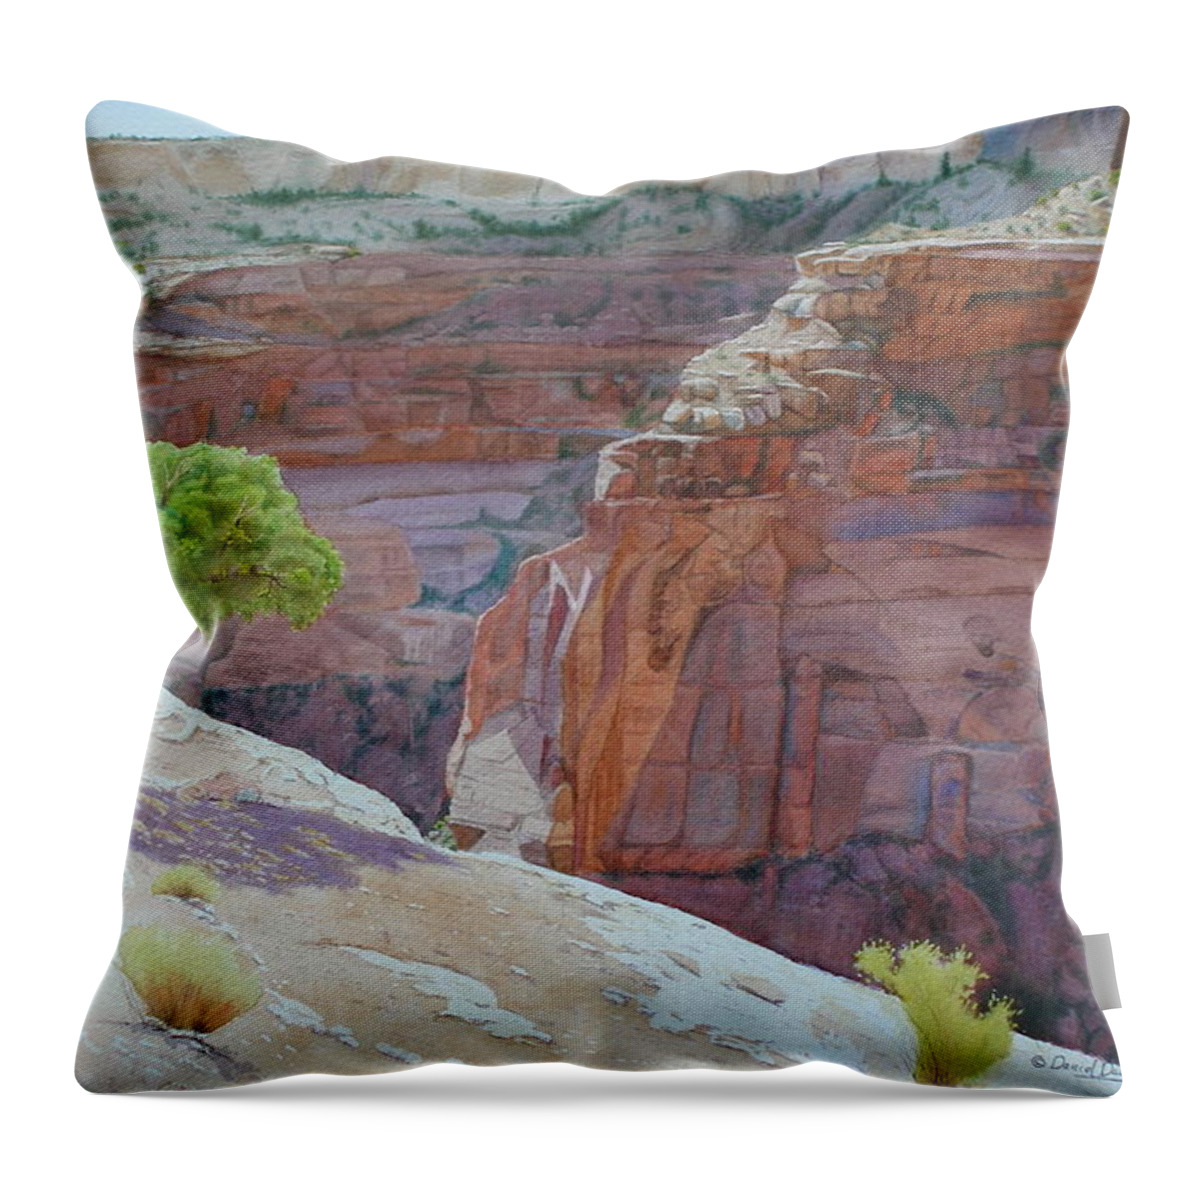 Desert Scene Throw Pillow featuring the painting Beyond Time at Painted Rock by Daniel Dayley